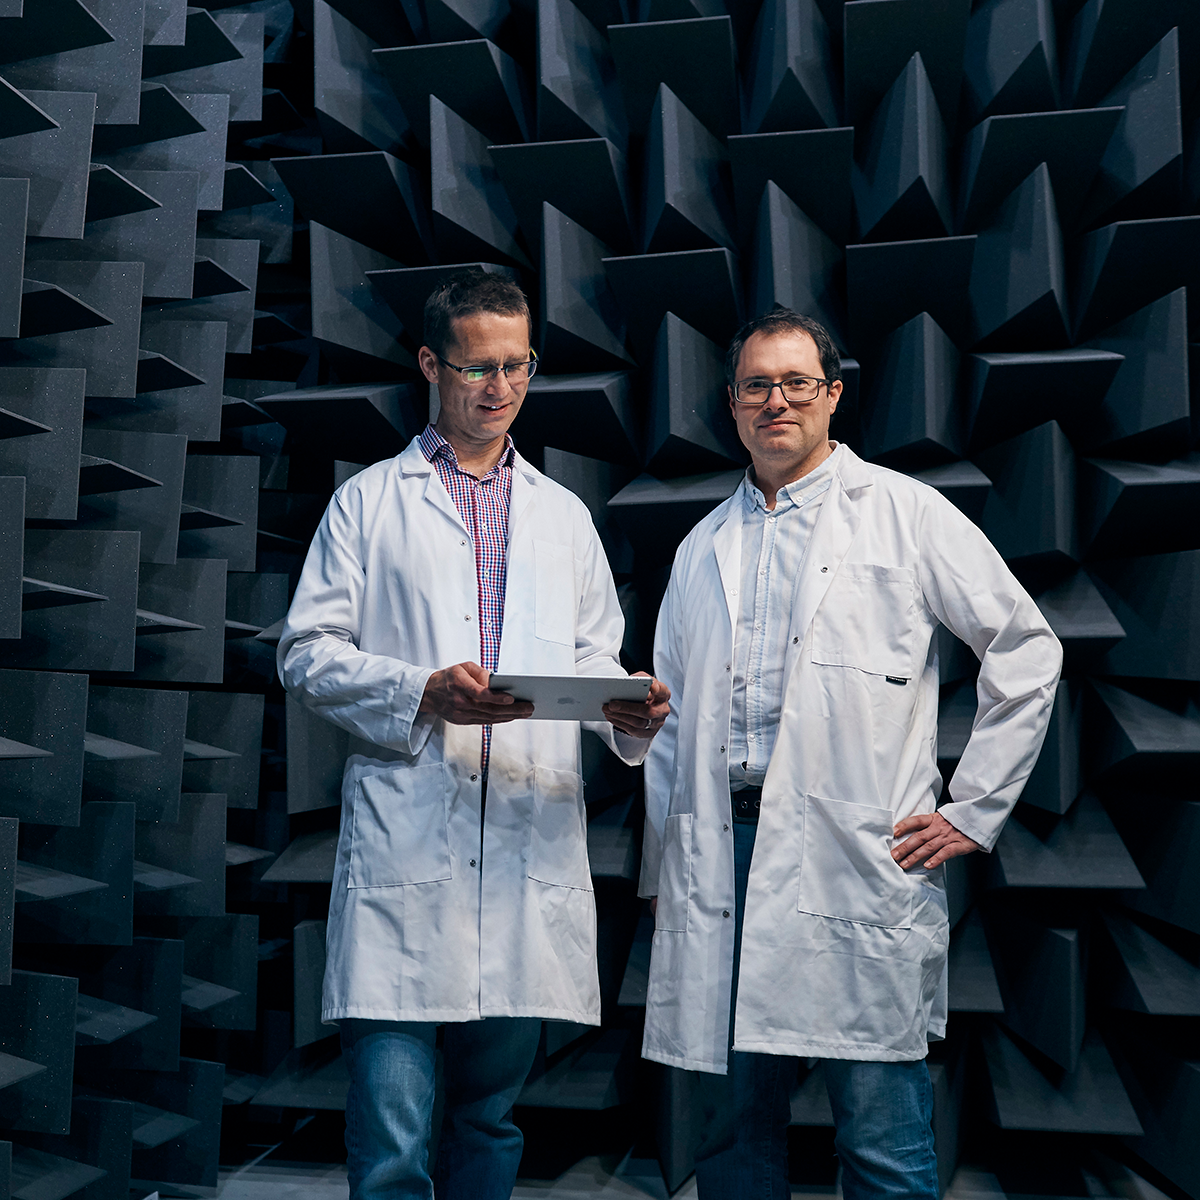 CAAV researchers, Dr Ben Halkon and A/Prof Sebastian Oberst in the anechoic chamber at UTS Tech Lab